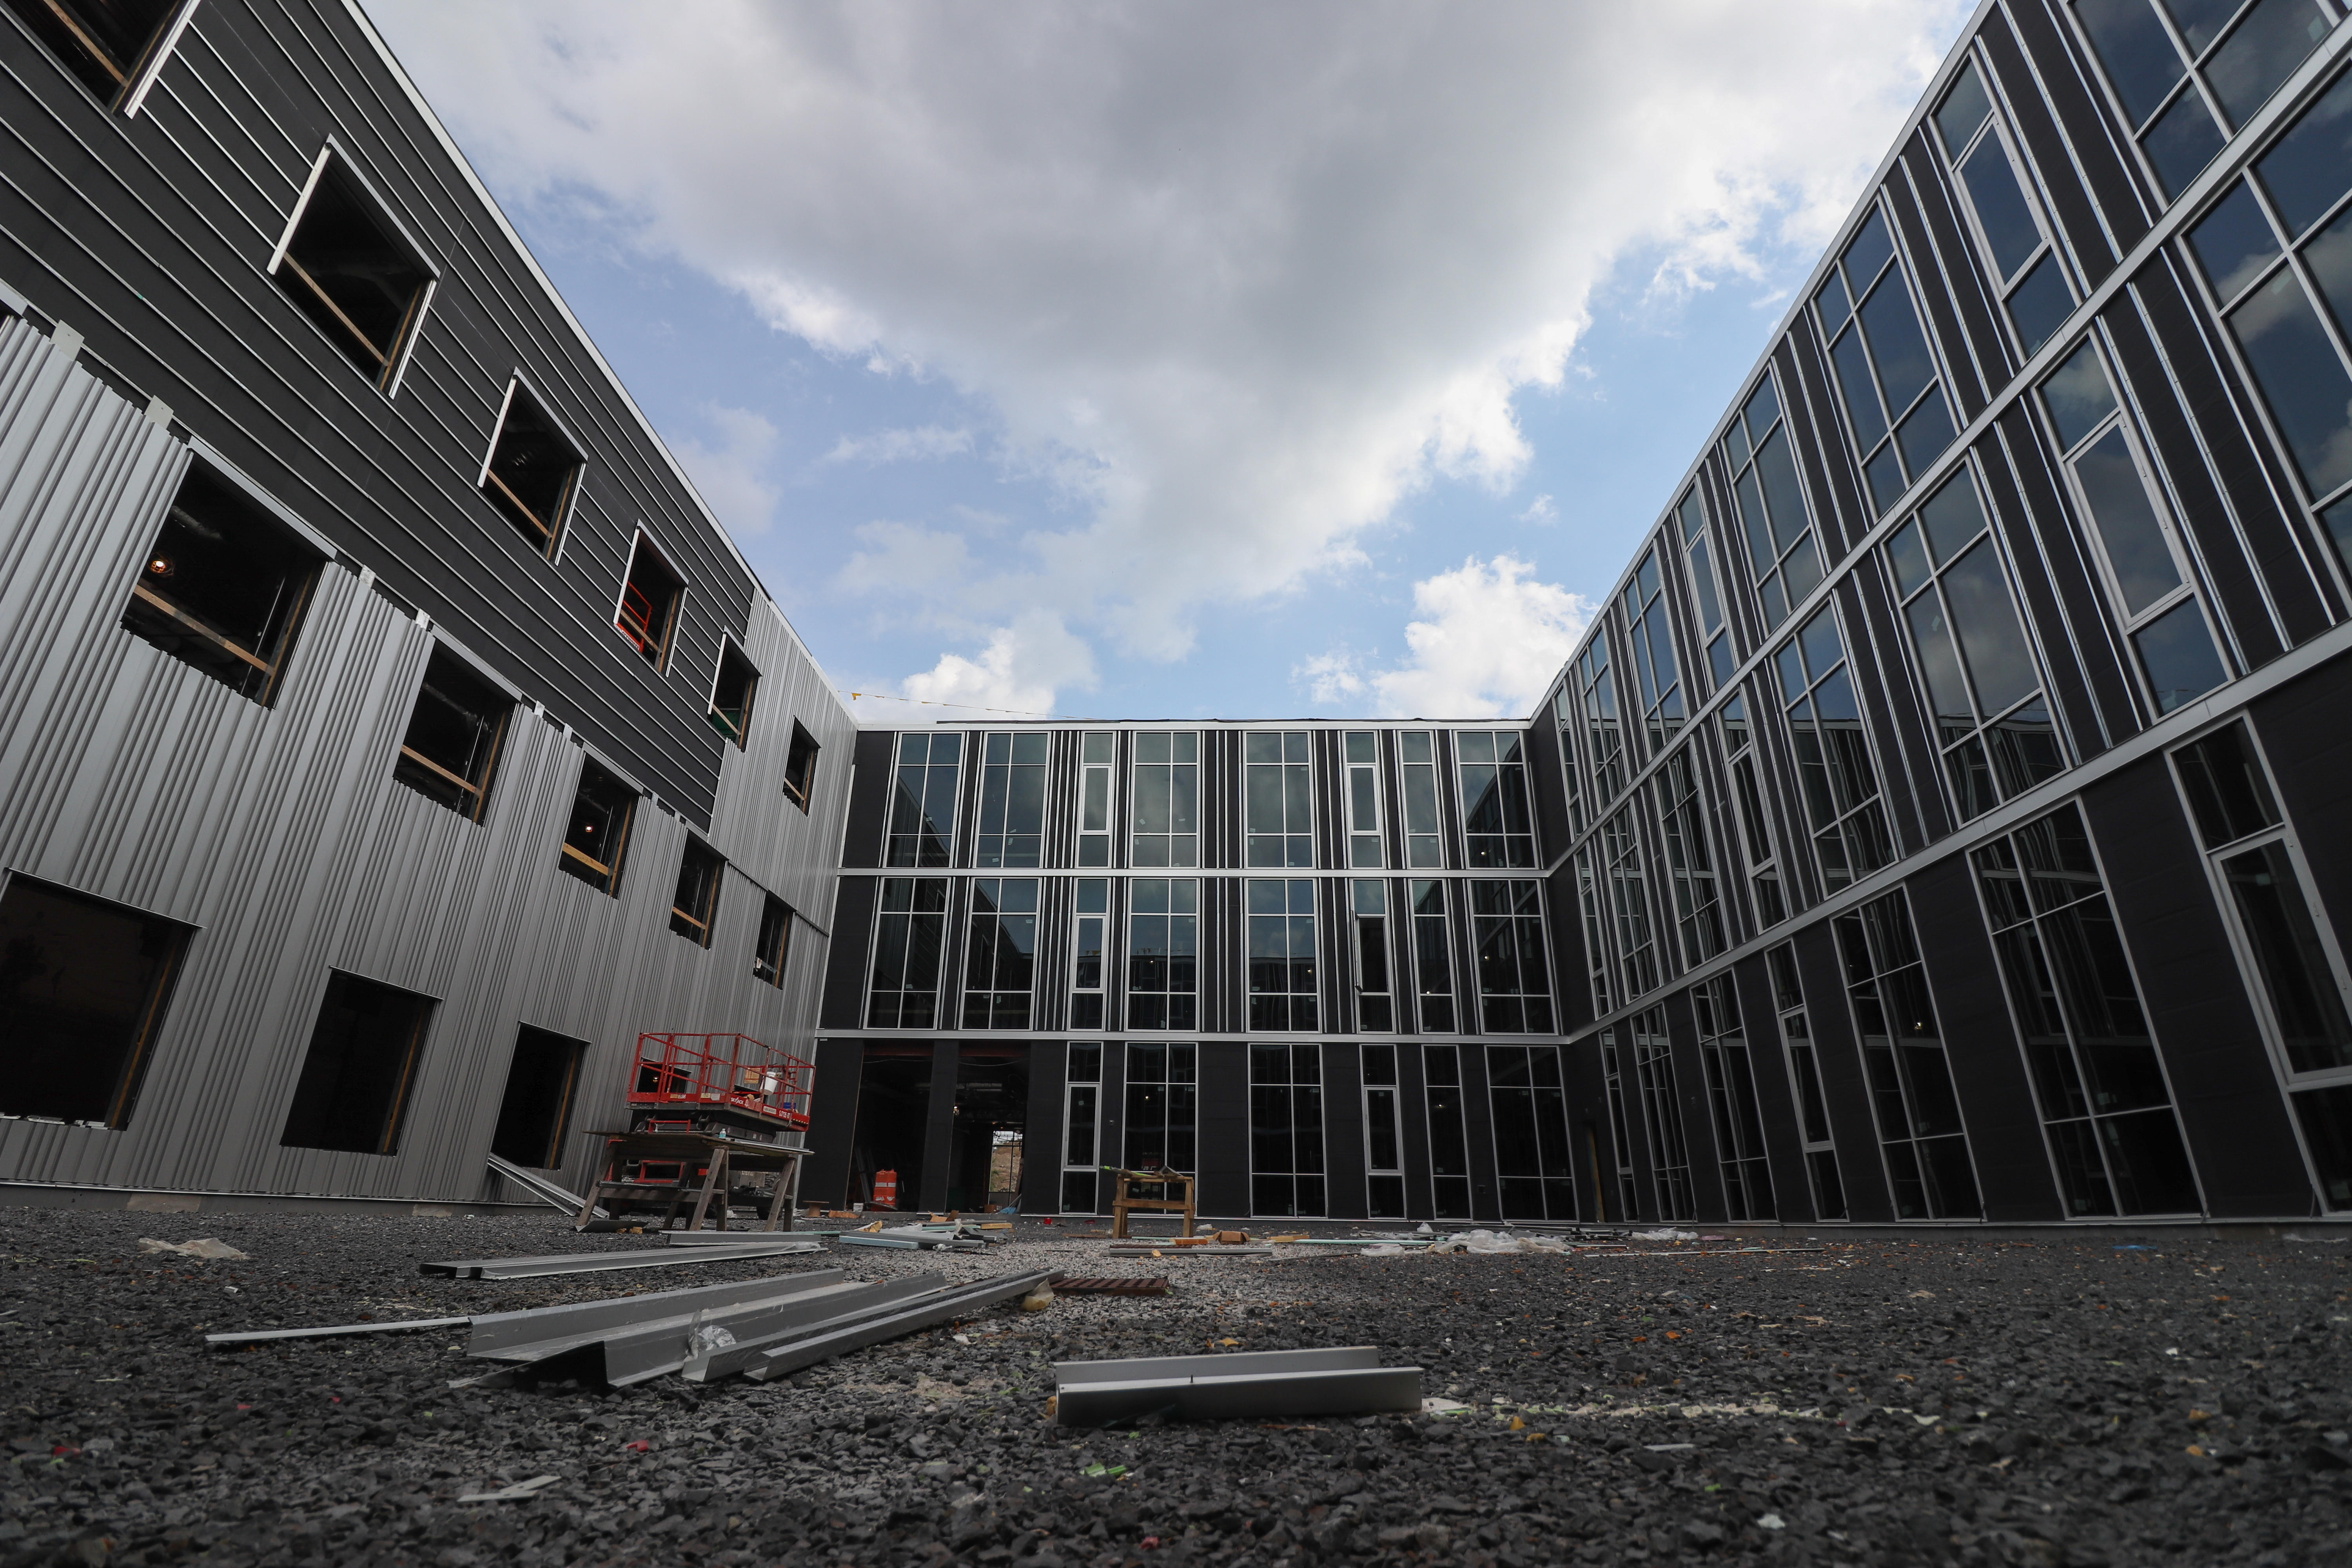 View of the new academic building as seen from the courtyard, looking up.